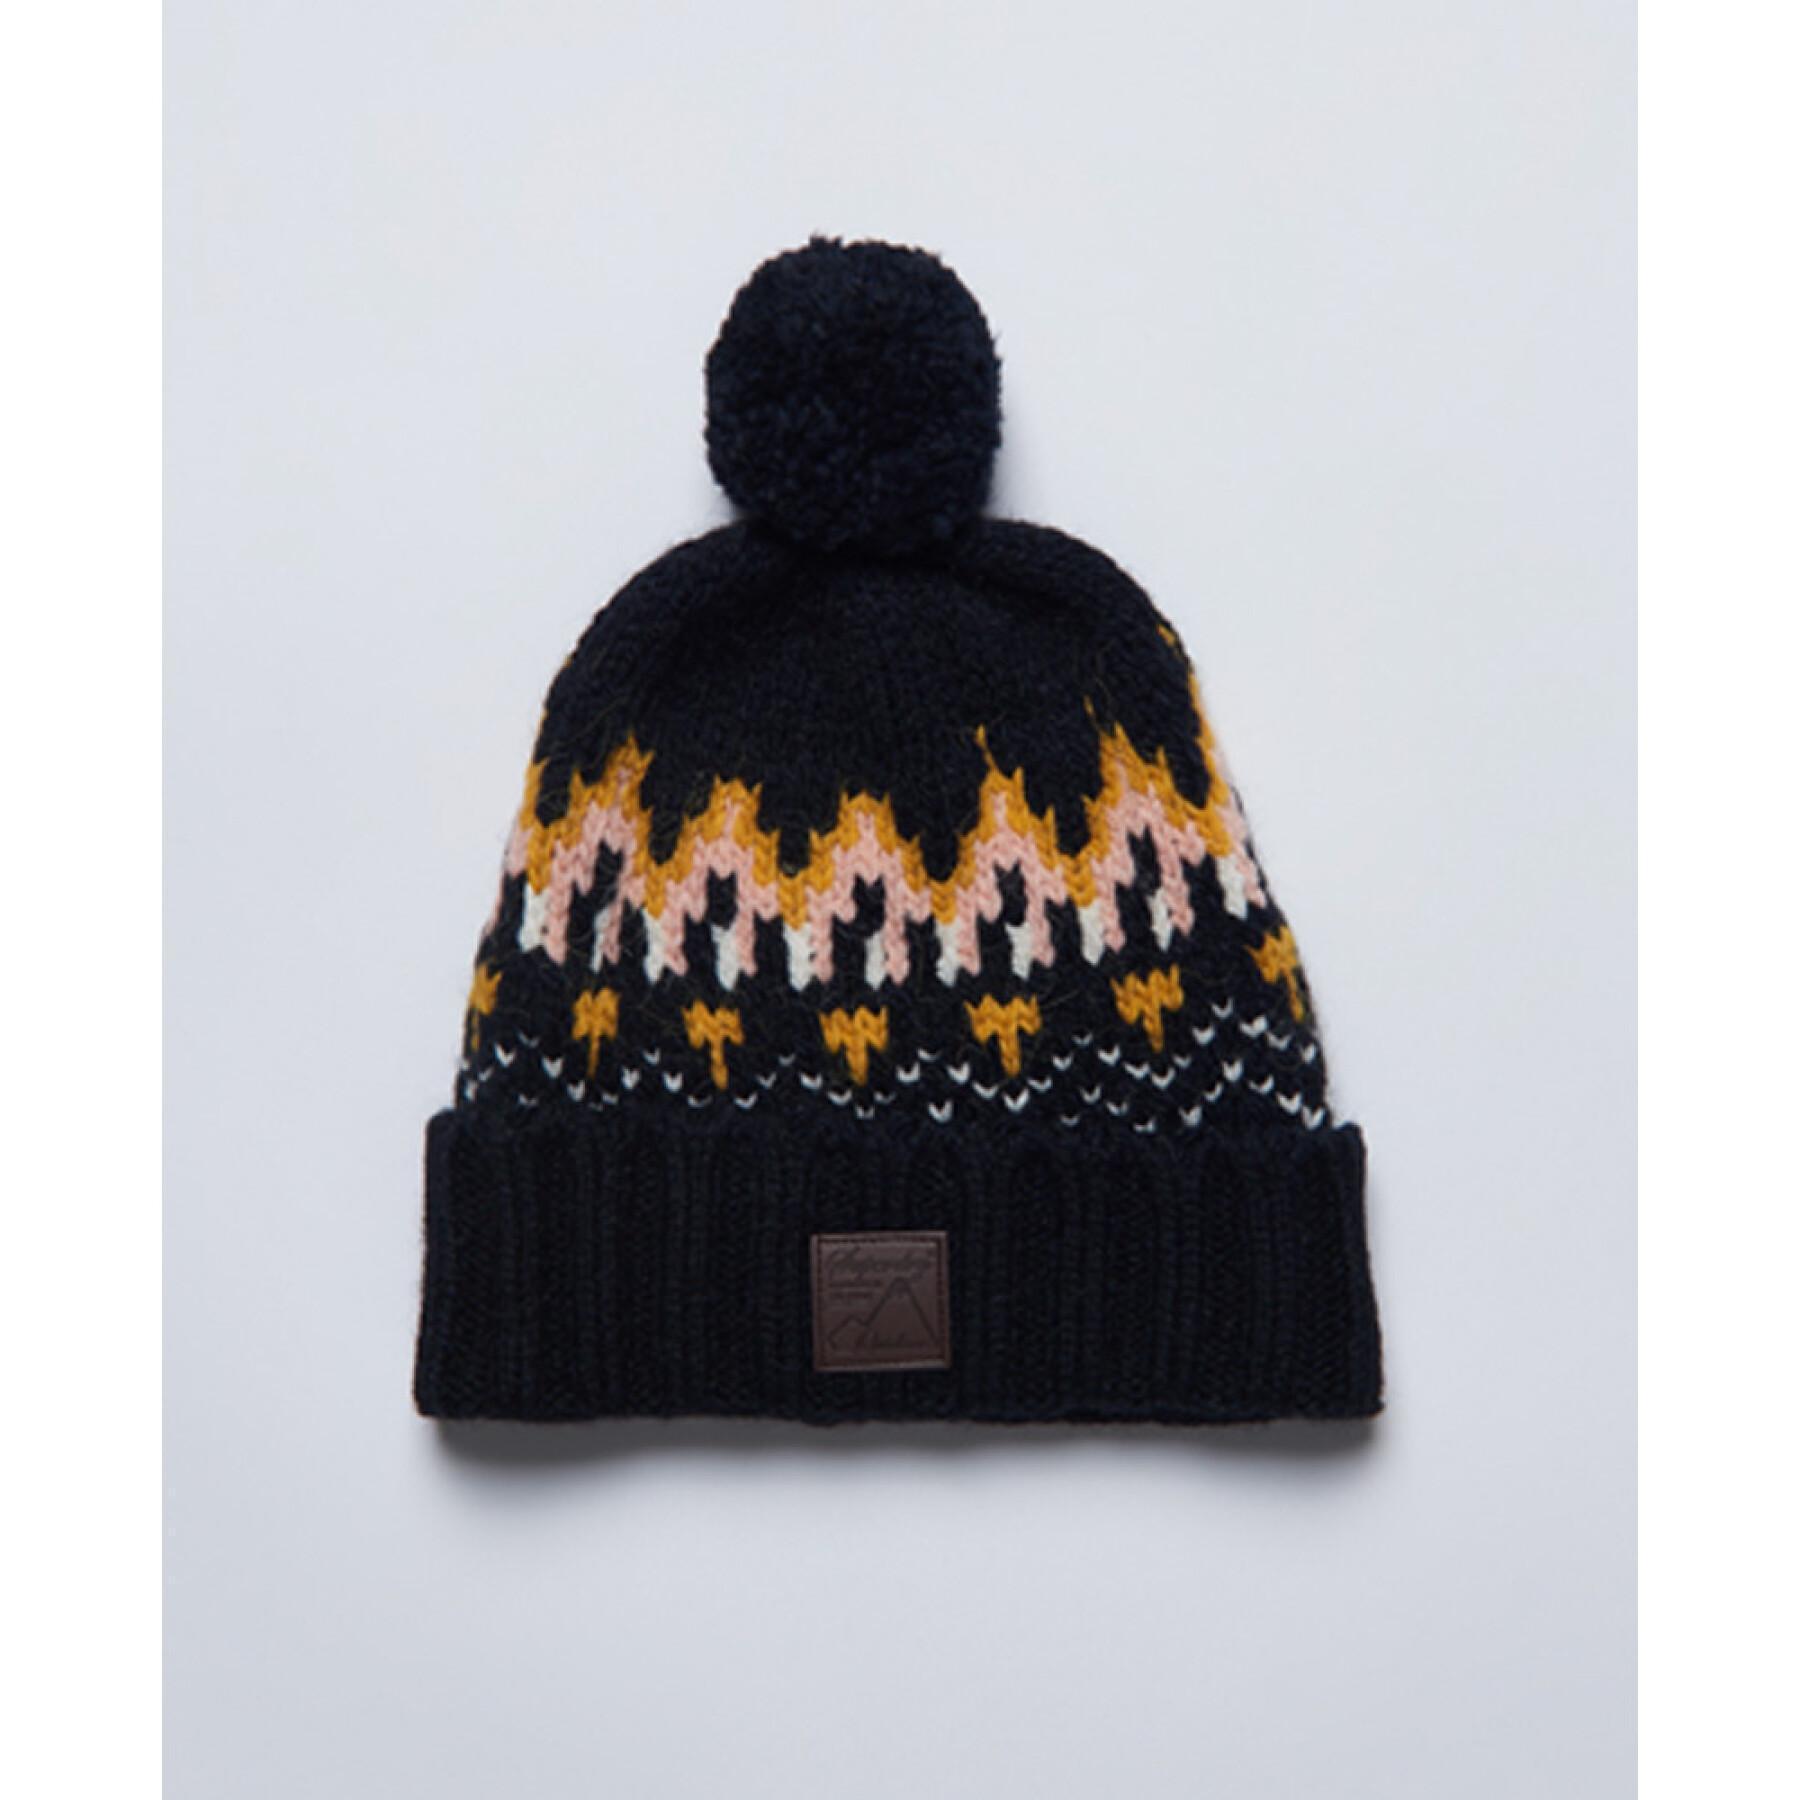 Women's knitted hat Superdry Intarsia